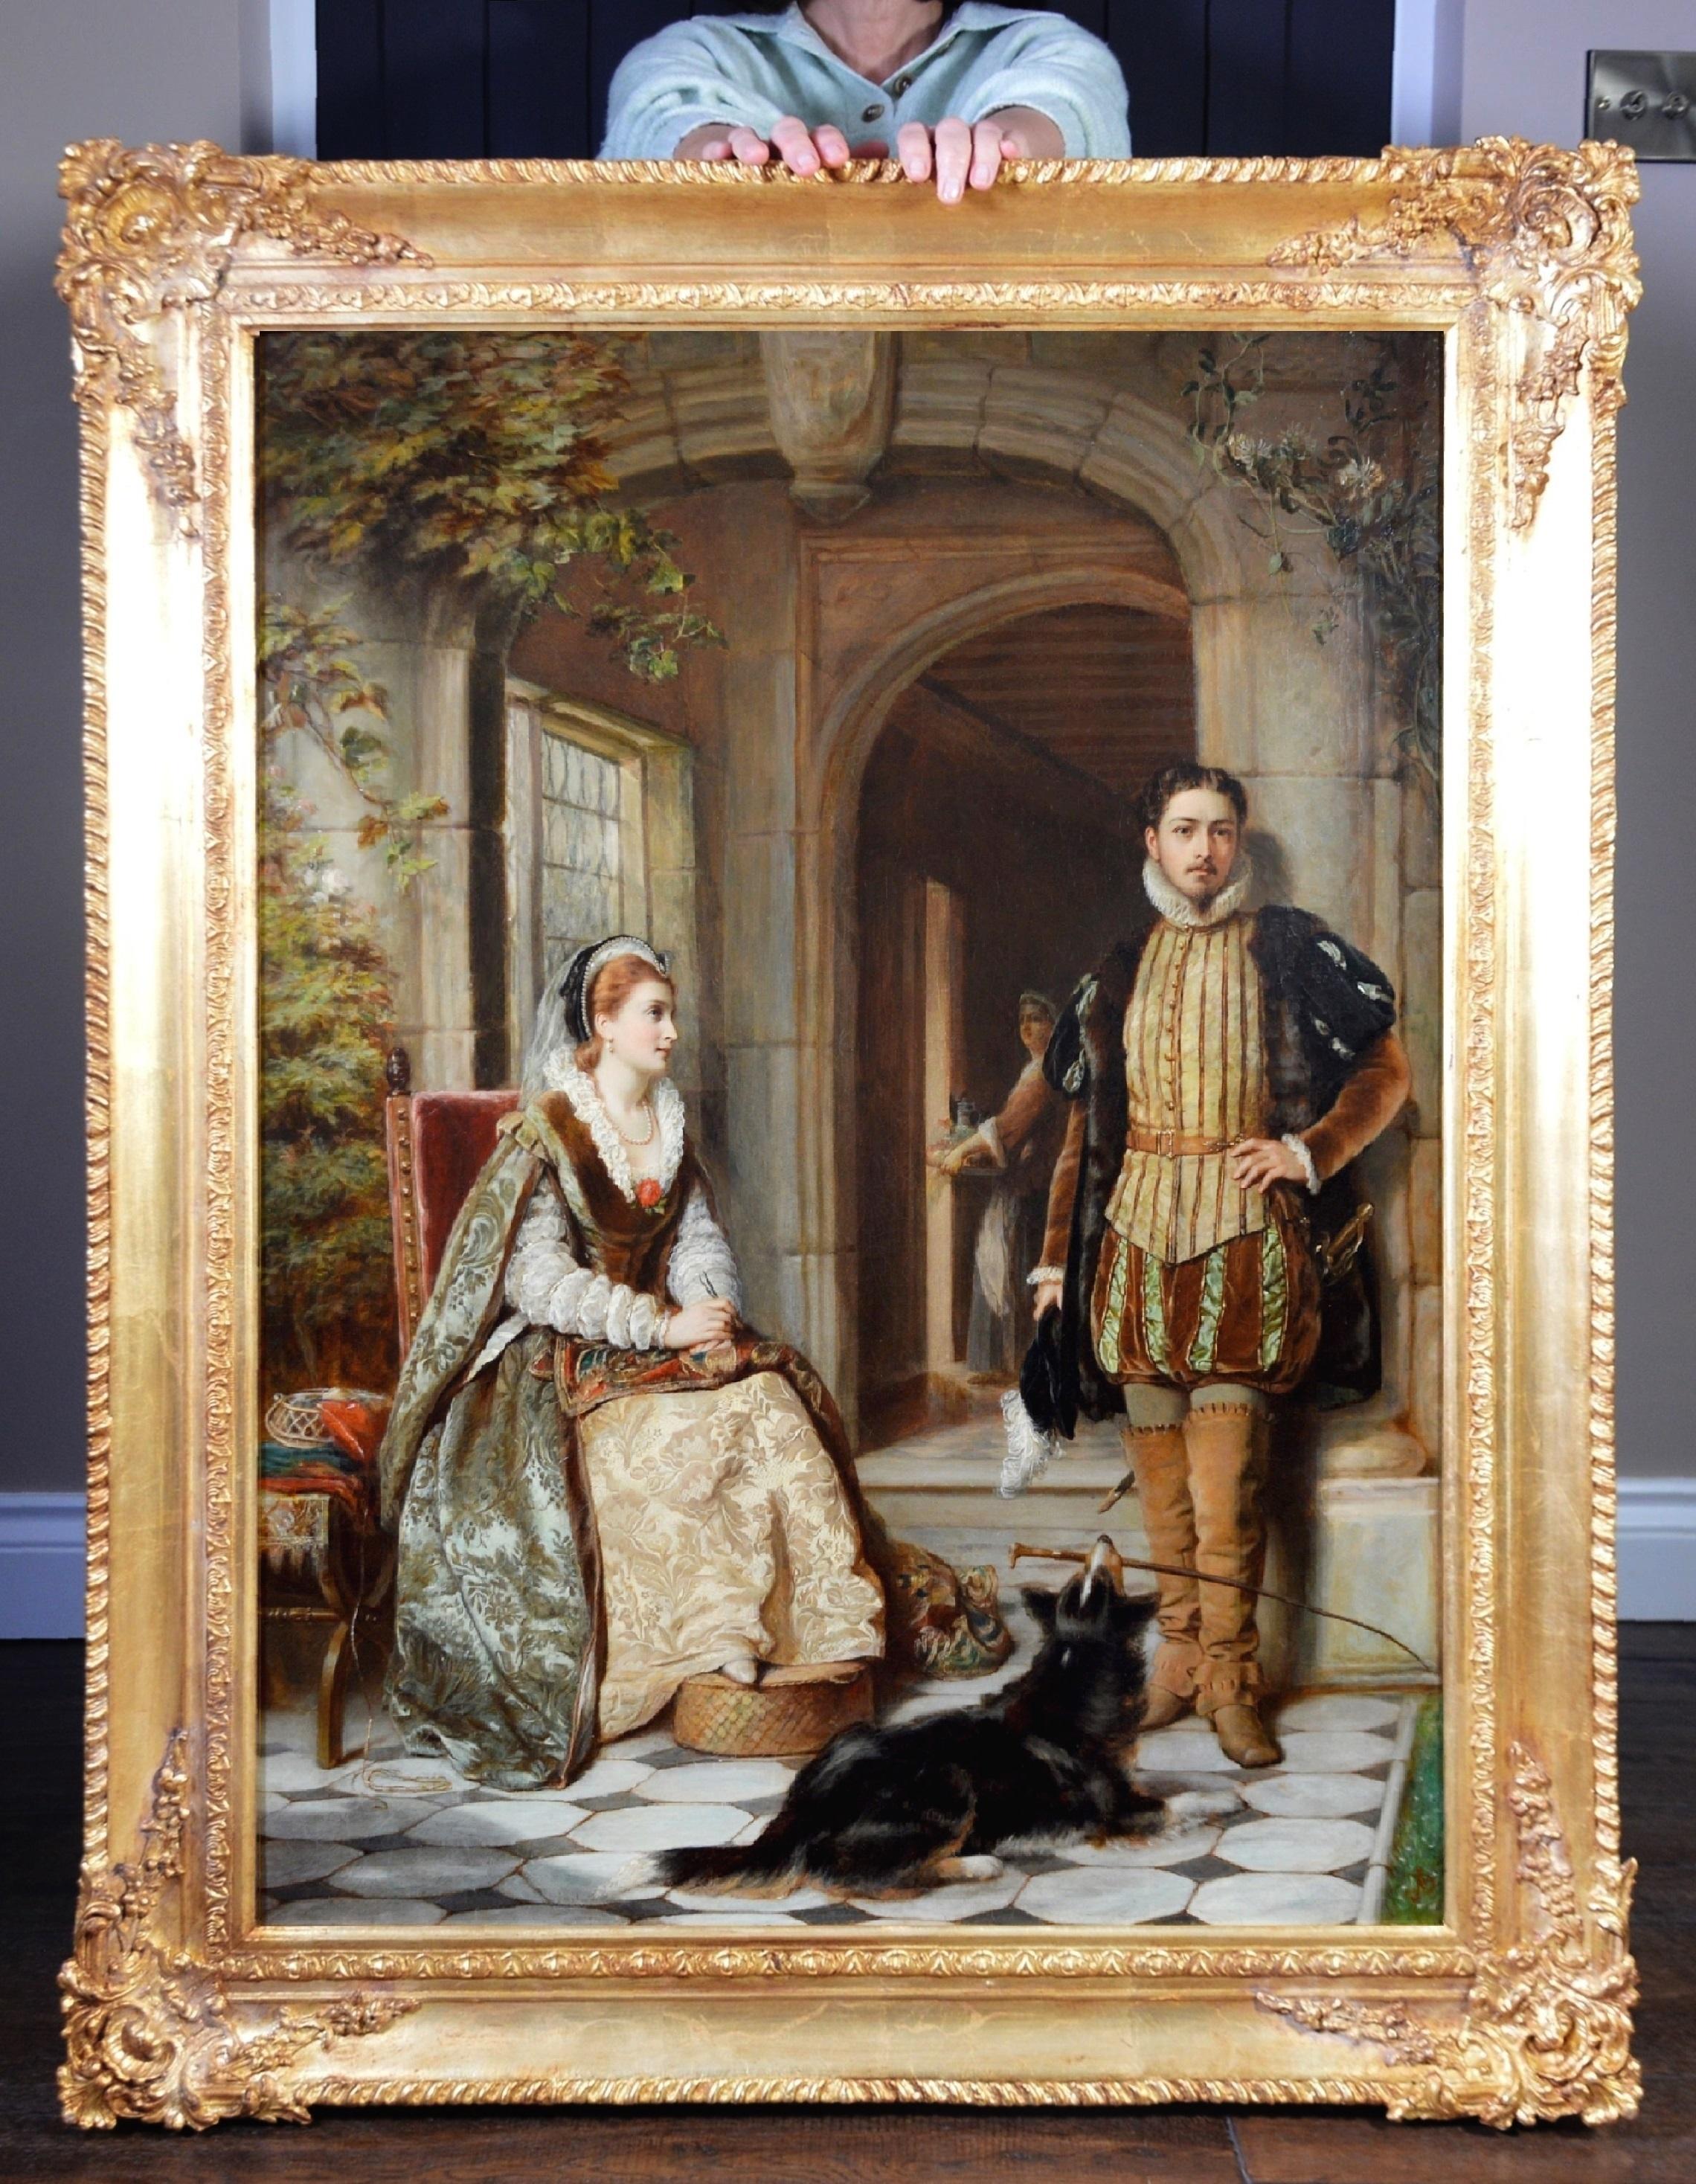 John Robert Dicksee Animal Painting - Elizabeth and Dudley, Doubt - Large 19th Century Royal Academy Oil Painting